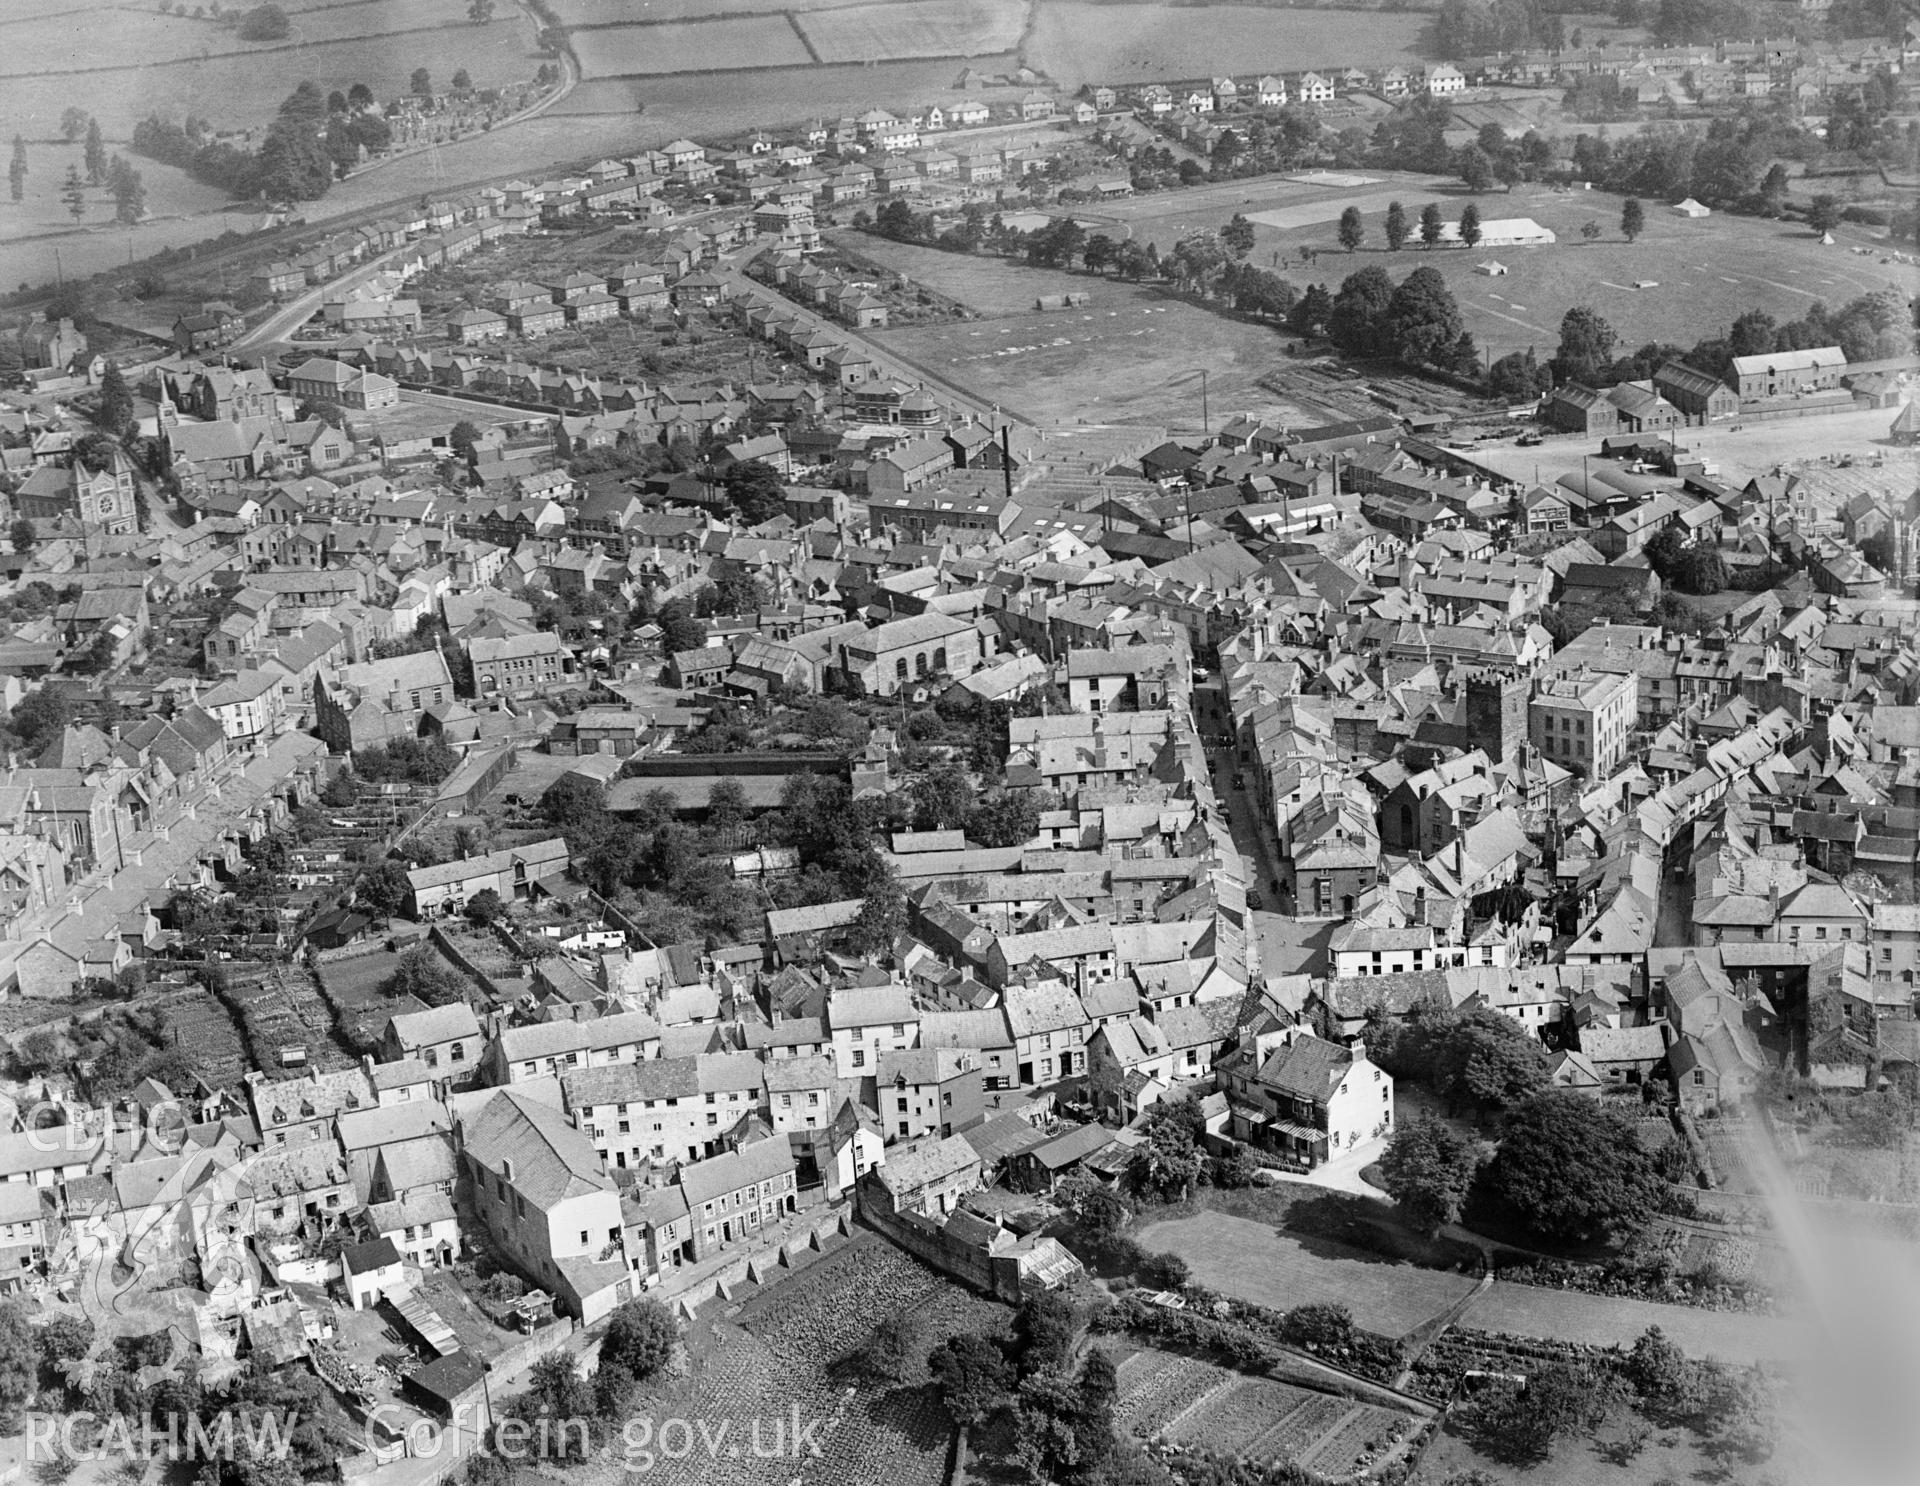 General view of Abergavenny, oblique aerial view. 5?x4? black and white glass plate negative.